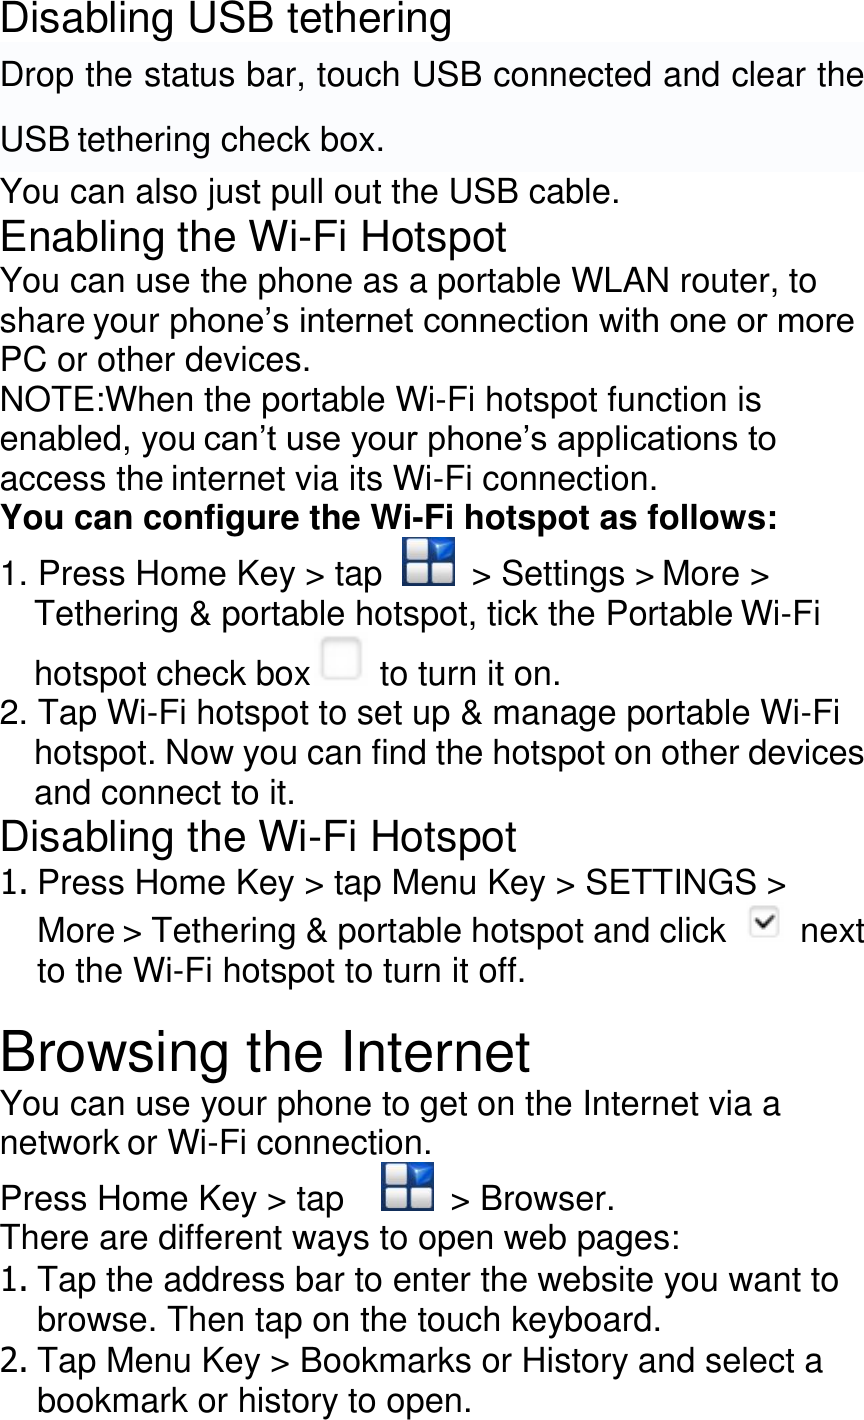 Disabling USB tethering Drop the status bar, touch USB connected and clear the USB tethering check box. You can also just pull out the USB cable. Enabling the Wi-Fi Hotspot You can use the phone as a portable WLAN router, to share your phone’s internet connection with one or more PC or other devices. NOTE:When the portable Wi-Fi hotspot function is enabled, you can’t use your phone’s applications to access the internet via its Wi-Fi connection. You can configure the Wi-Fi hotspot as follows: 1. Press Home Key &gt; tap    &gt; Settings &gt; More &gt; Tethering &amp; portable hotspot, tick the Portable Wi-Fi hotspot check box  to turn it on. 2. Tap Wi-Fi hotspot to set up &amp; manage portable Wi-Fi hotspot. Now you can find the hotspot on other devices and connect to it. Disabling the Wi-Fi Hotspot 1. Press Home Key &gt; tap Menu Key &gt; SETTINGS &gt; More &gt; Tethering &amp; portable hotspot and click   next to the Wi-Fi hotspot to turn it off.  Browsing the Internet You can use your phone to get on the Internet via a network or Wi-Fi connection. Press Home Key &gt; tap      &gt; Browser. There are different ways to open web pages: 1. Tap the address bar to enter the website you want to browse. Then tap on the touch keyboard. 2. Tap Menu Key &gt; Bookmarks or History and select a bookmark or history to open. 